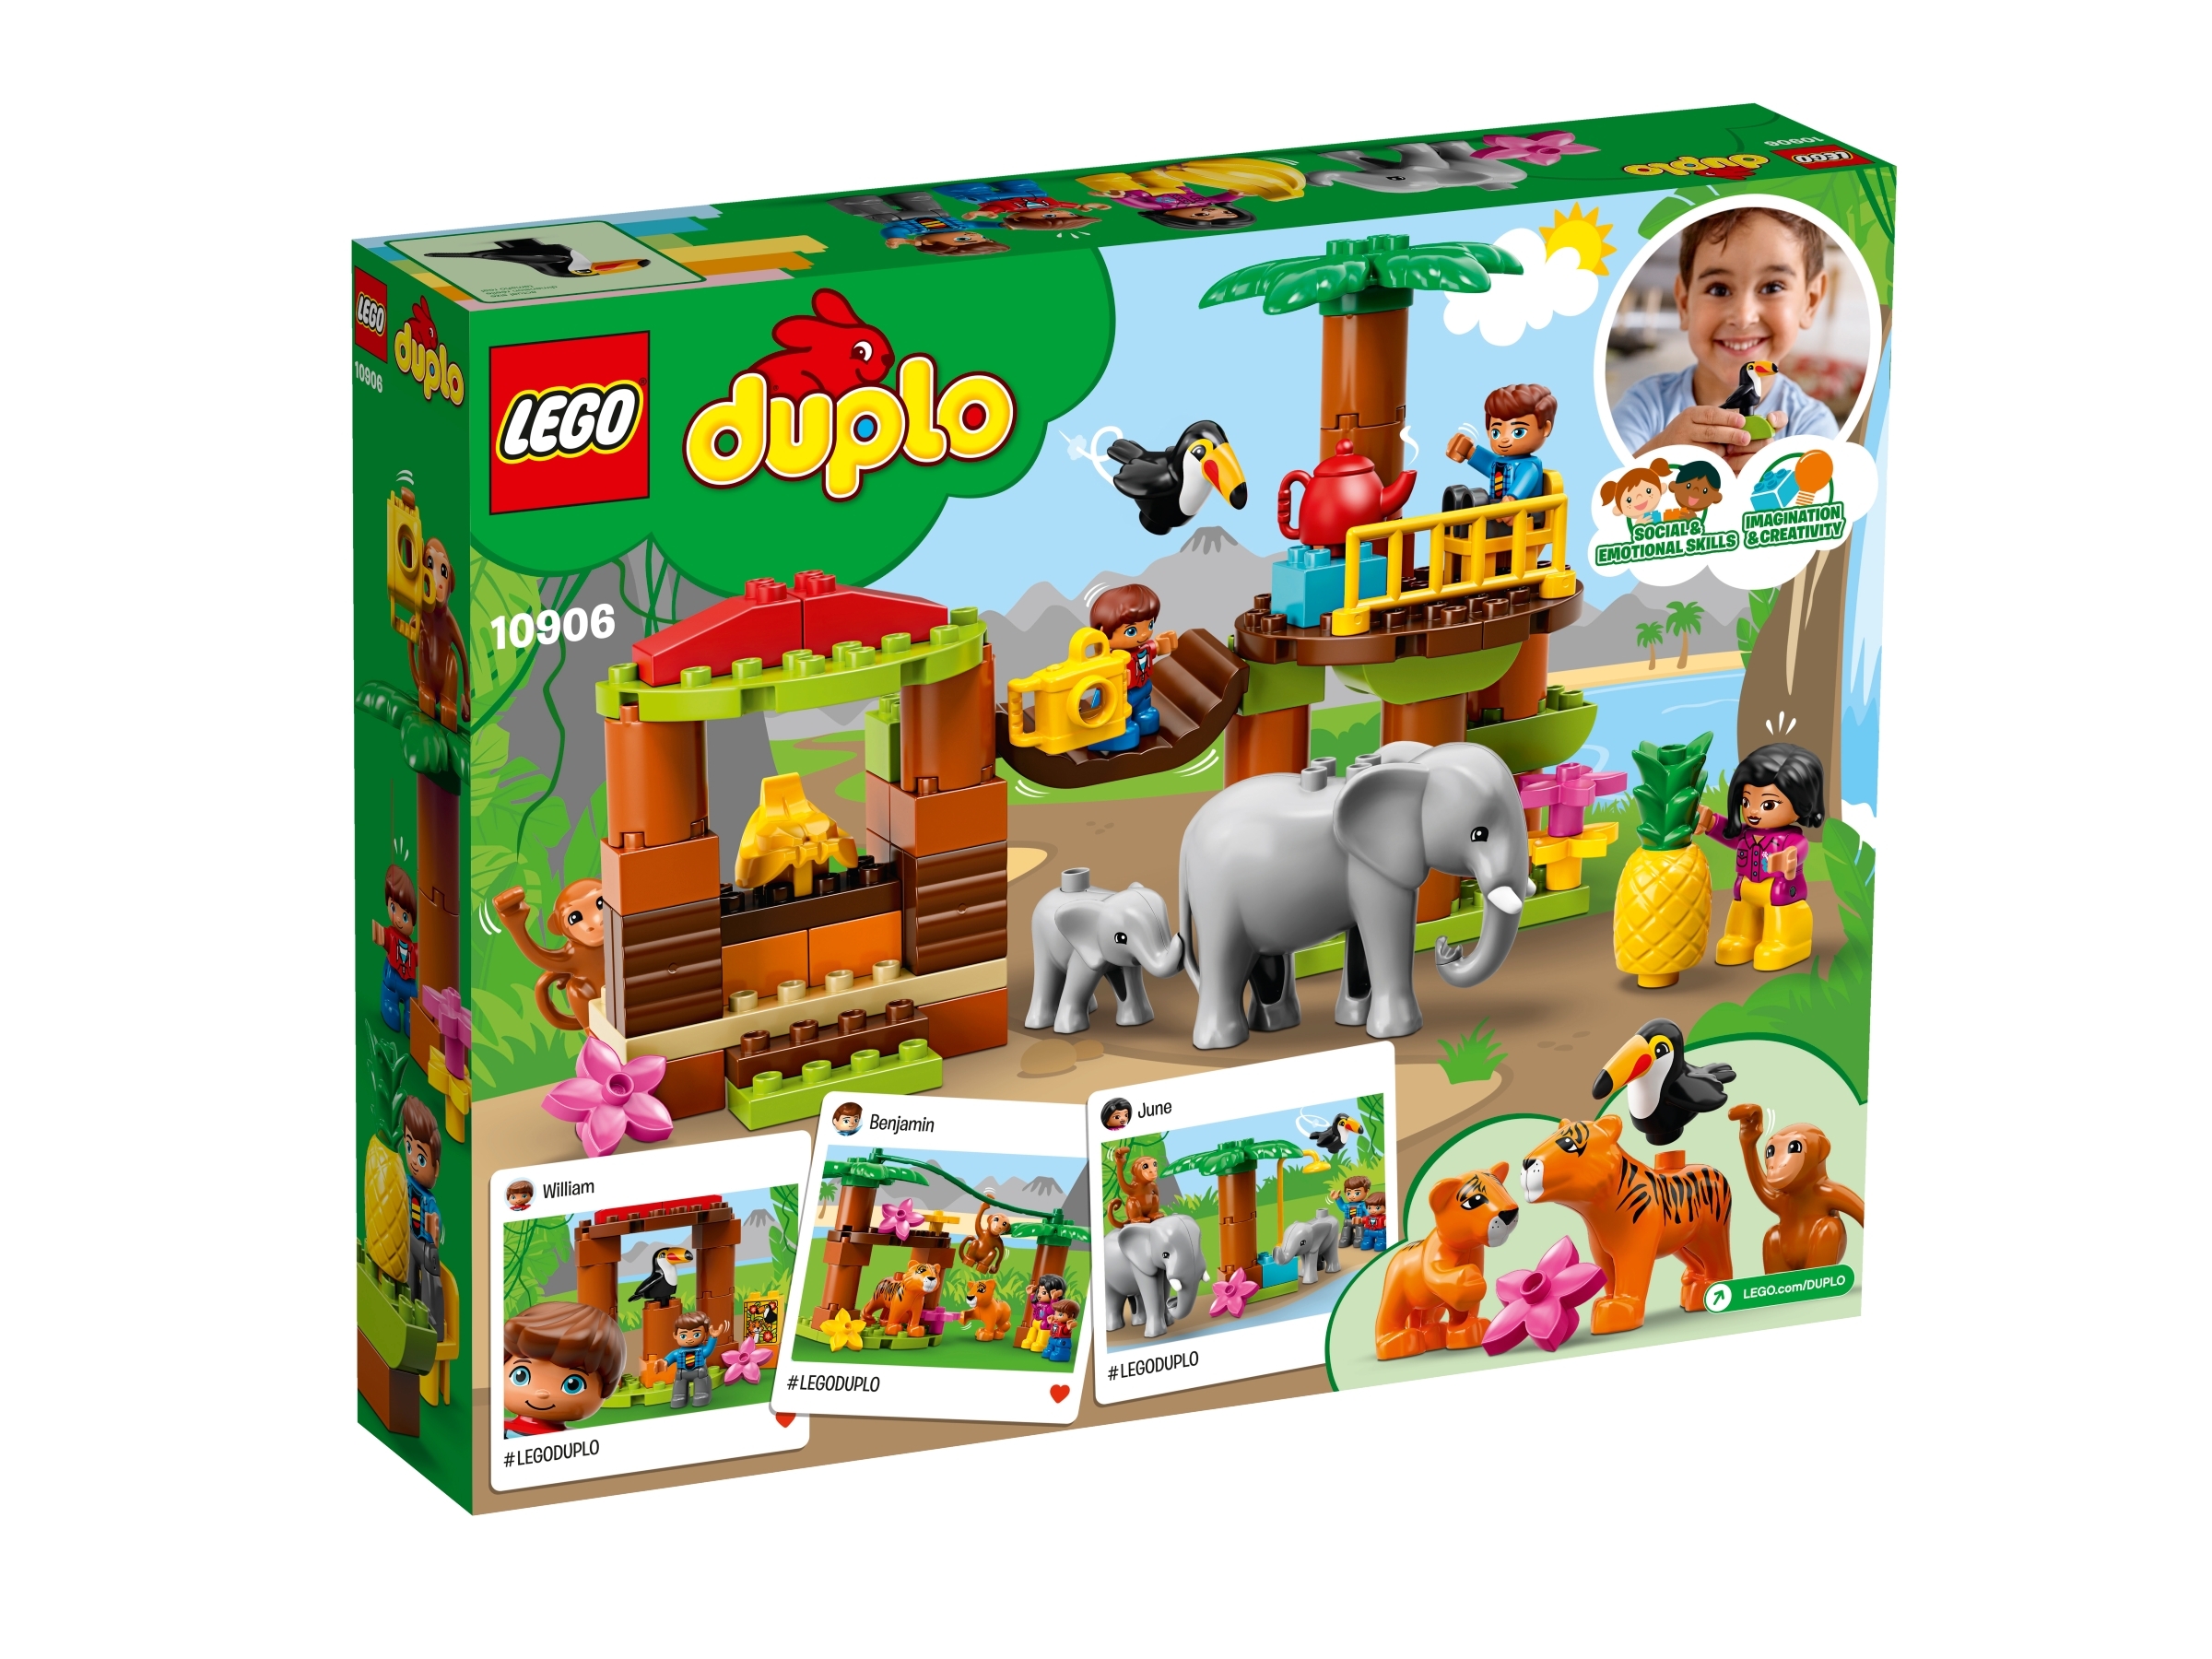 Tropical Island 10906 | DUPLO® | Buy online at the LEGO® Shop US